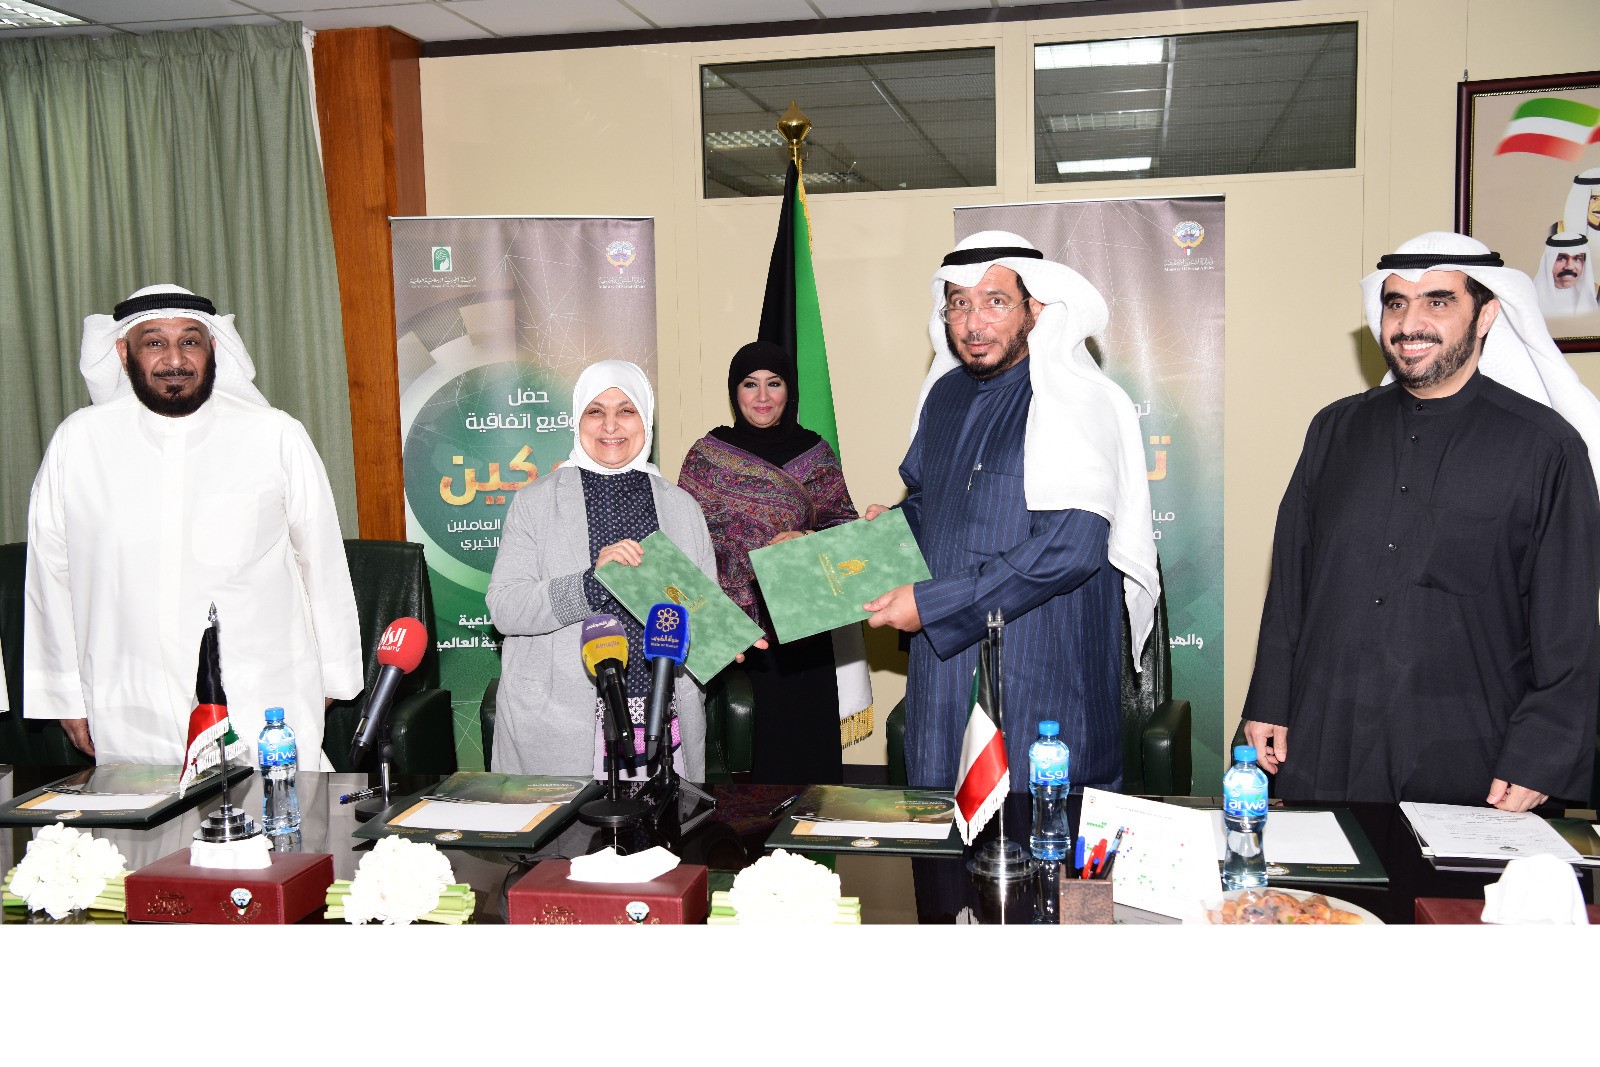 Chairman of the (IICO) Dr. Abdullah Al-Maatouq  with Minister of Social Affairs and Labor Hind Al-Sabeeh during a ceremony